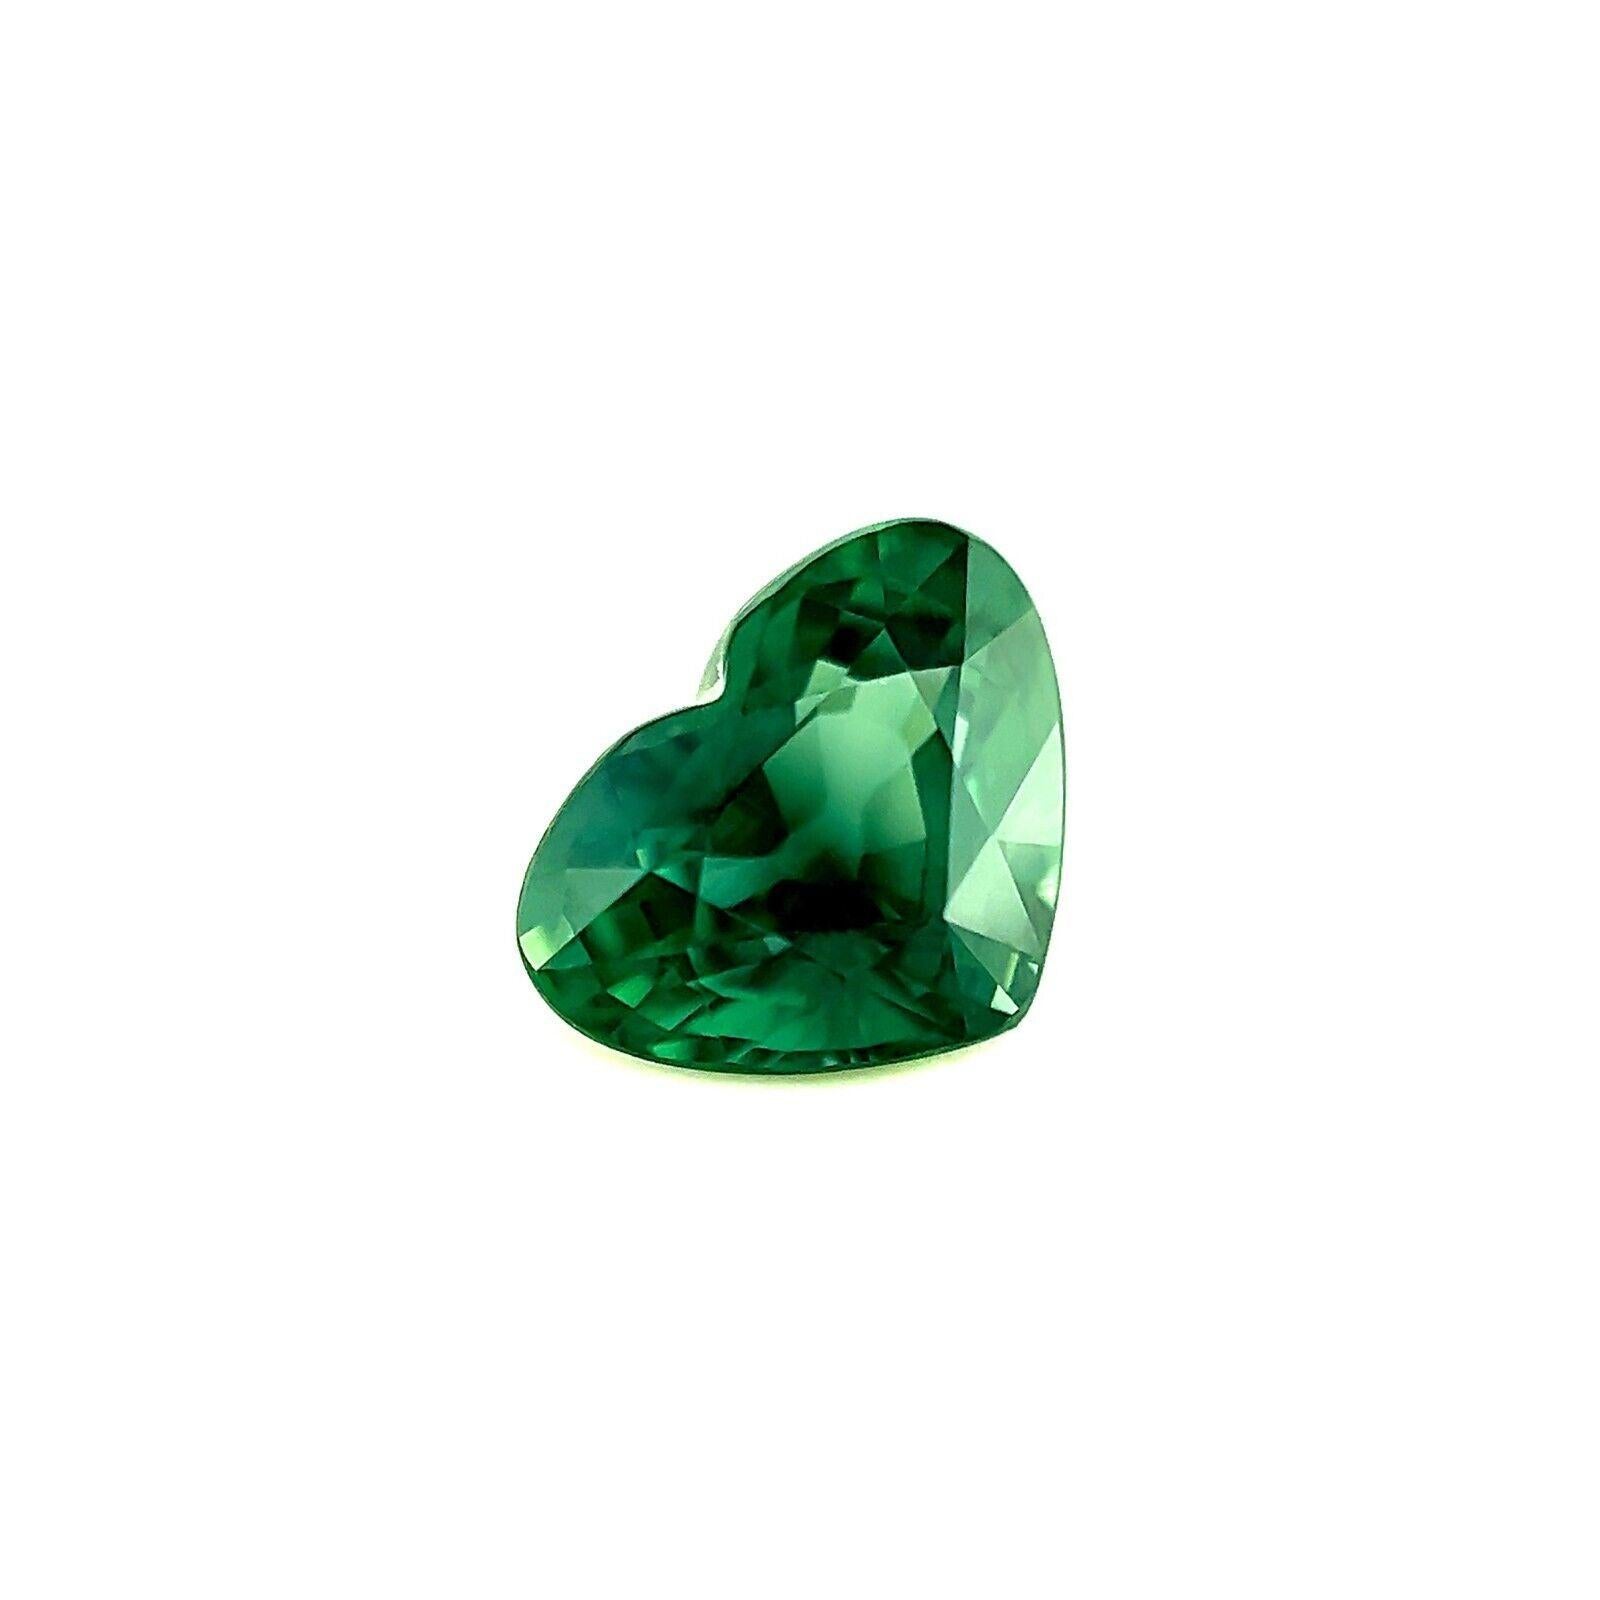 2.06Ct Natural Green Sapphire GRA Certified Untreated Heart Cut Gem

Natural Vivid Green Untreated Sapphire Gemstone.
Fine quality unheated sapphire with a beautiful vivid green colour.
Fully certified by GRA confirming stone as natural and